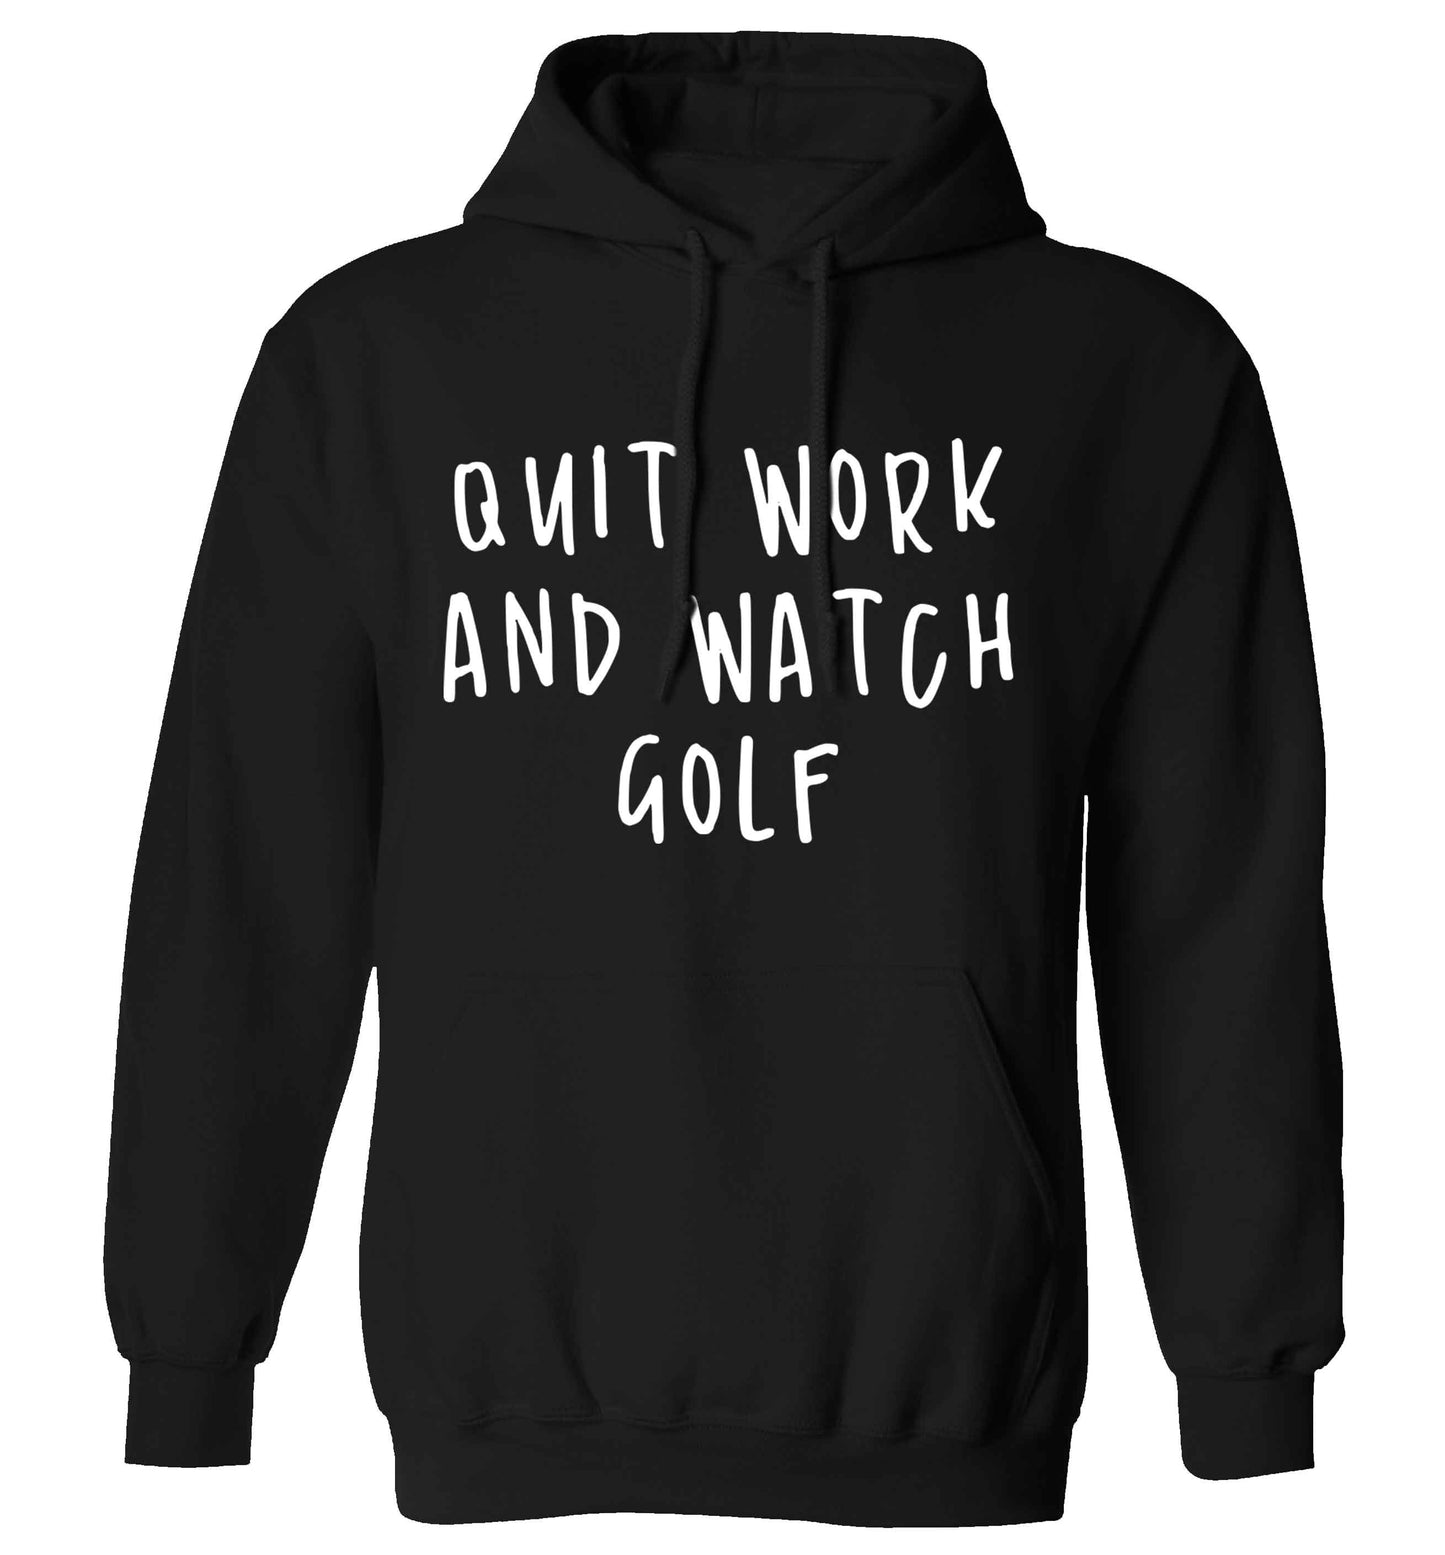 Quit work and watch golf adults unisex black hoodie 2XL